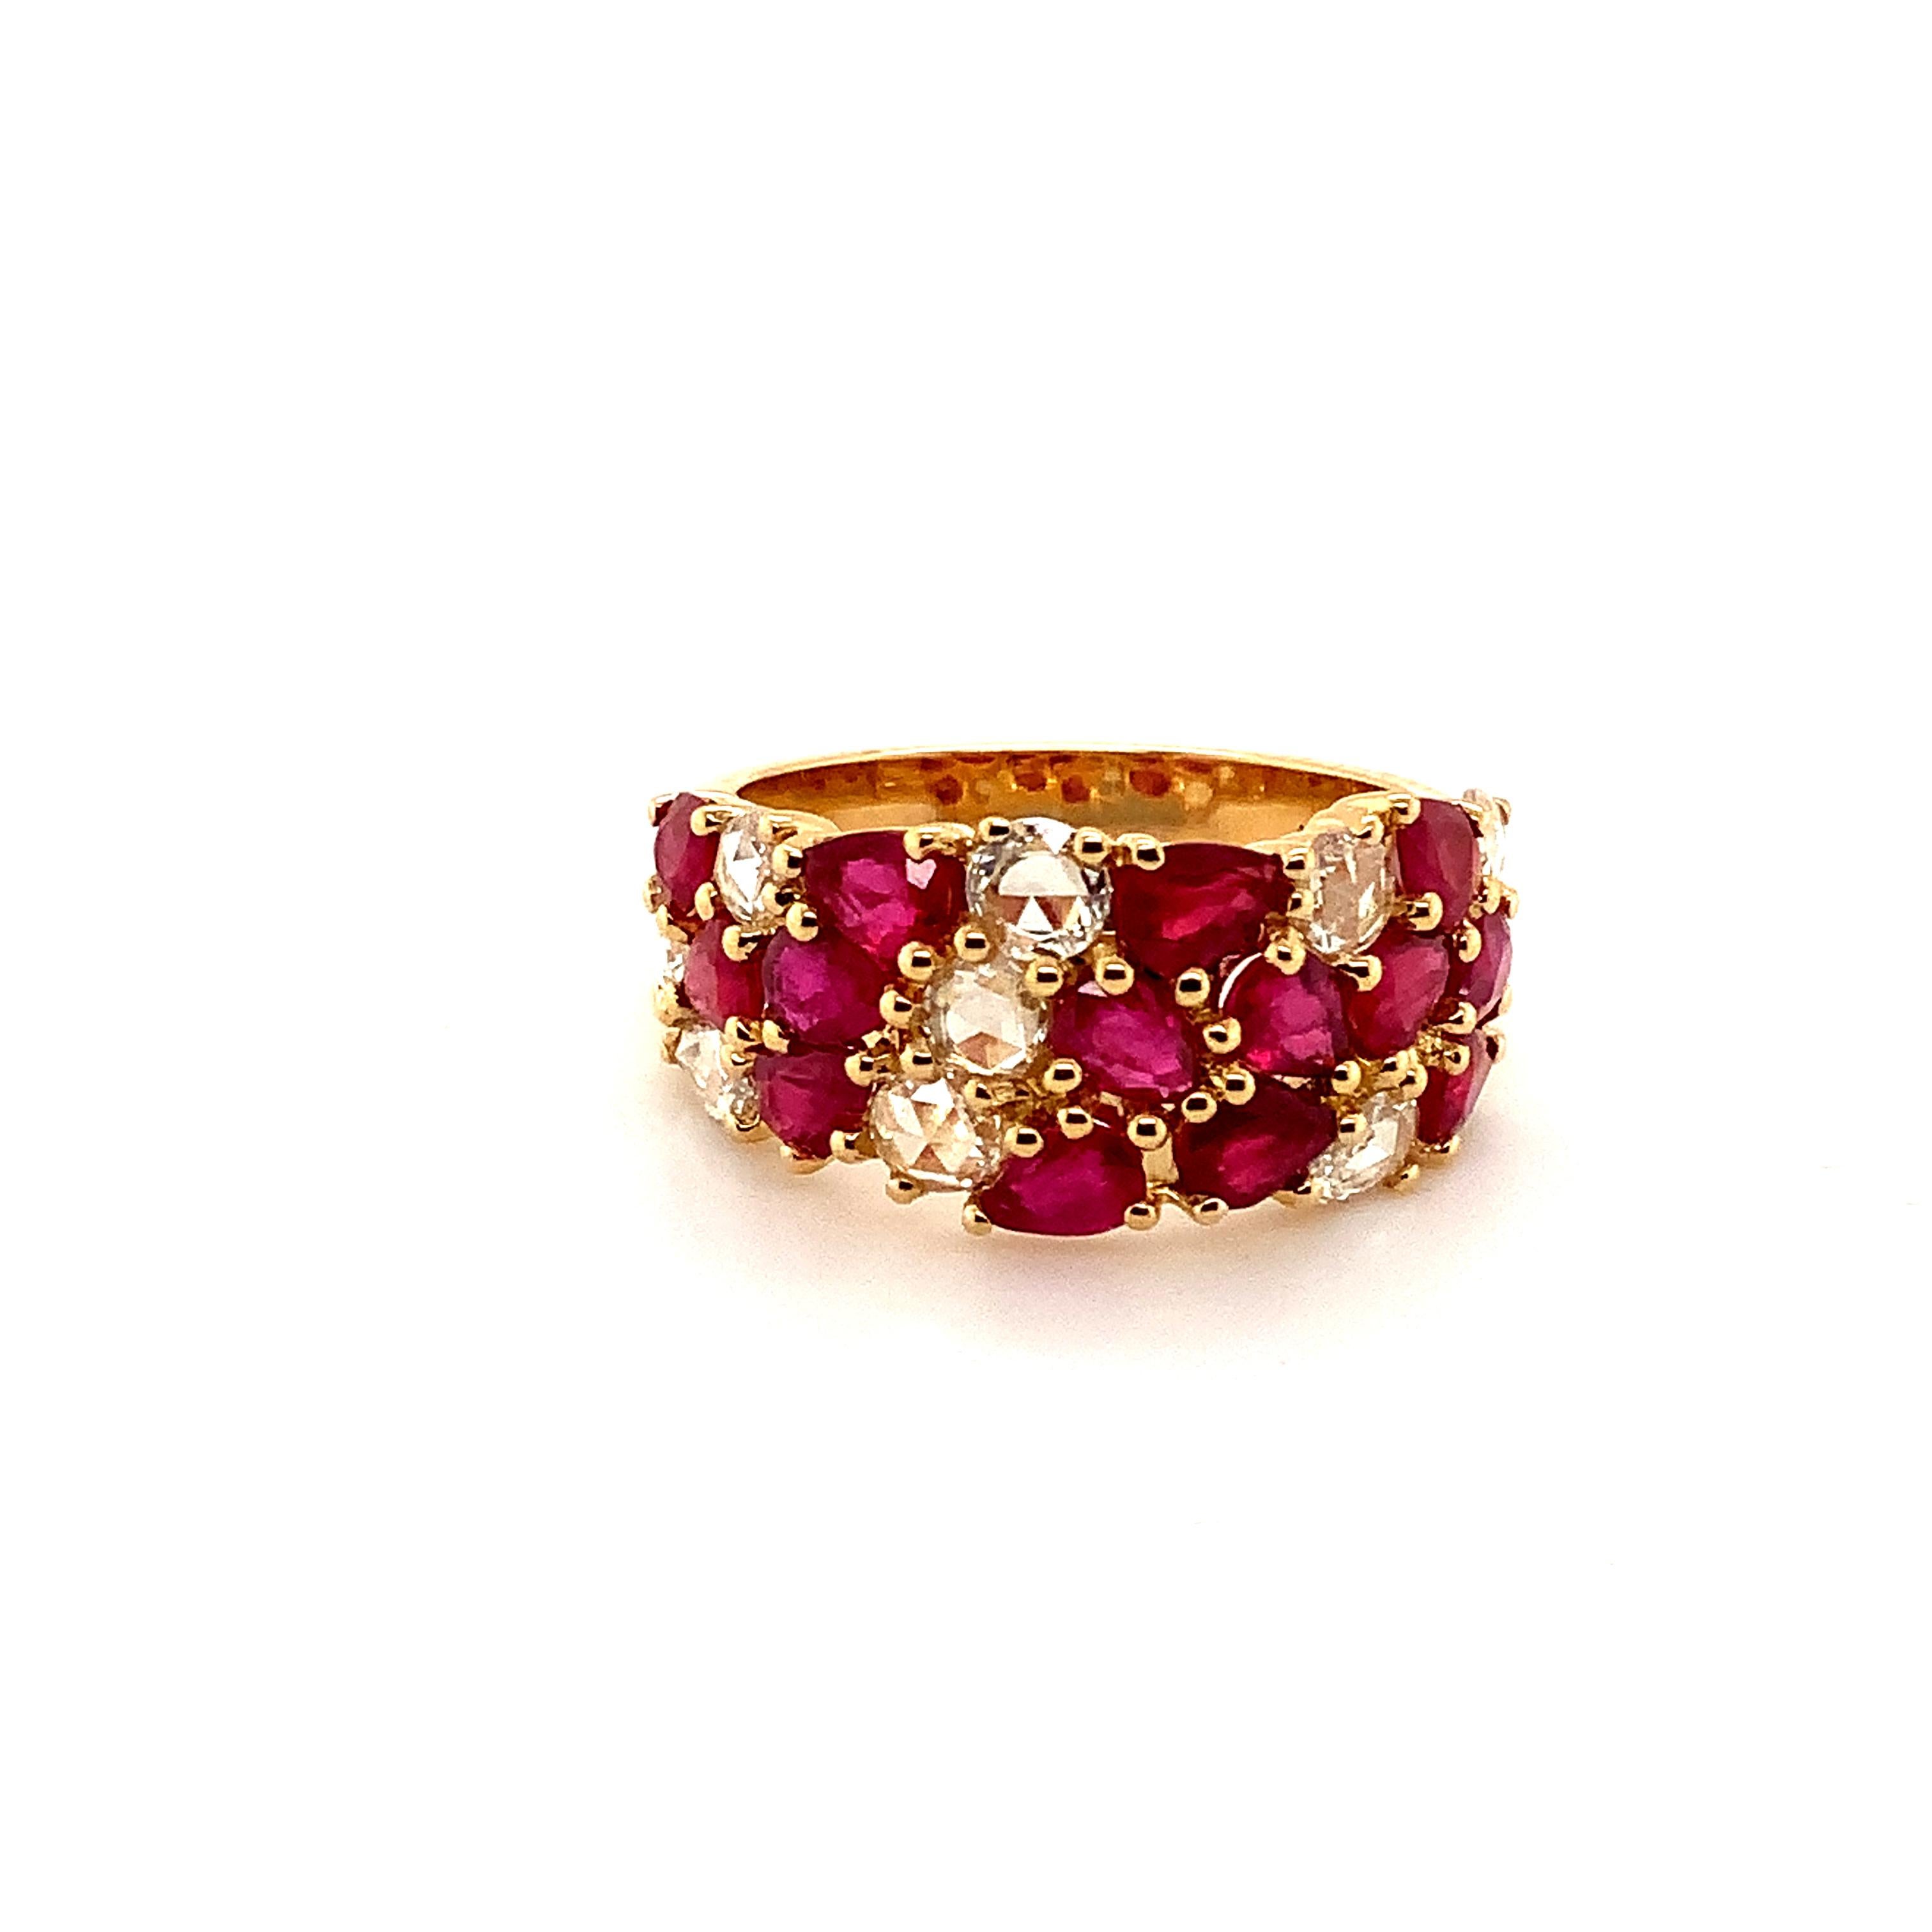 This Three Row Band from ASBA Collection features stunning Fine Ruby and Rose Cut Diamonds set in 18K Yellow Gold. The low profile design offers effortless wearability. With 9 Round Rose Cut Diamonds totaling 0.73 ct. tw. in F Color and VS Clarity,